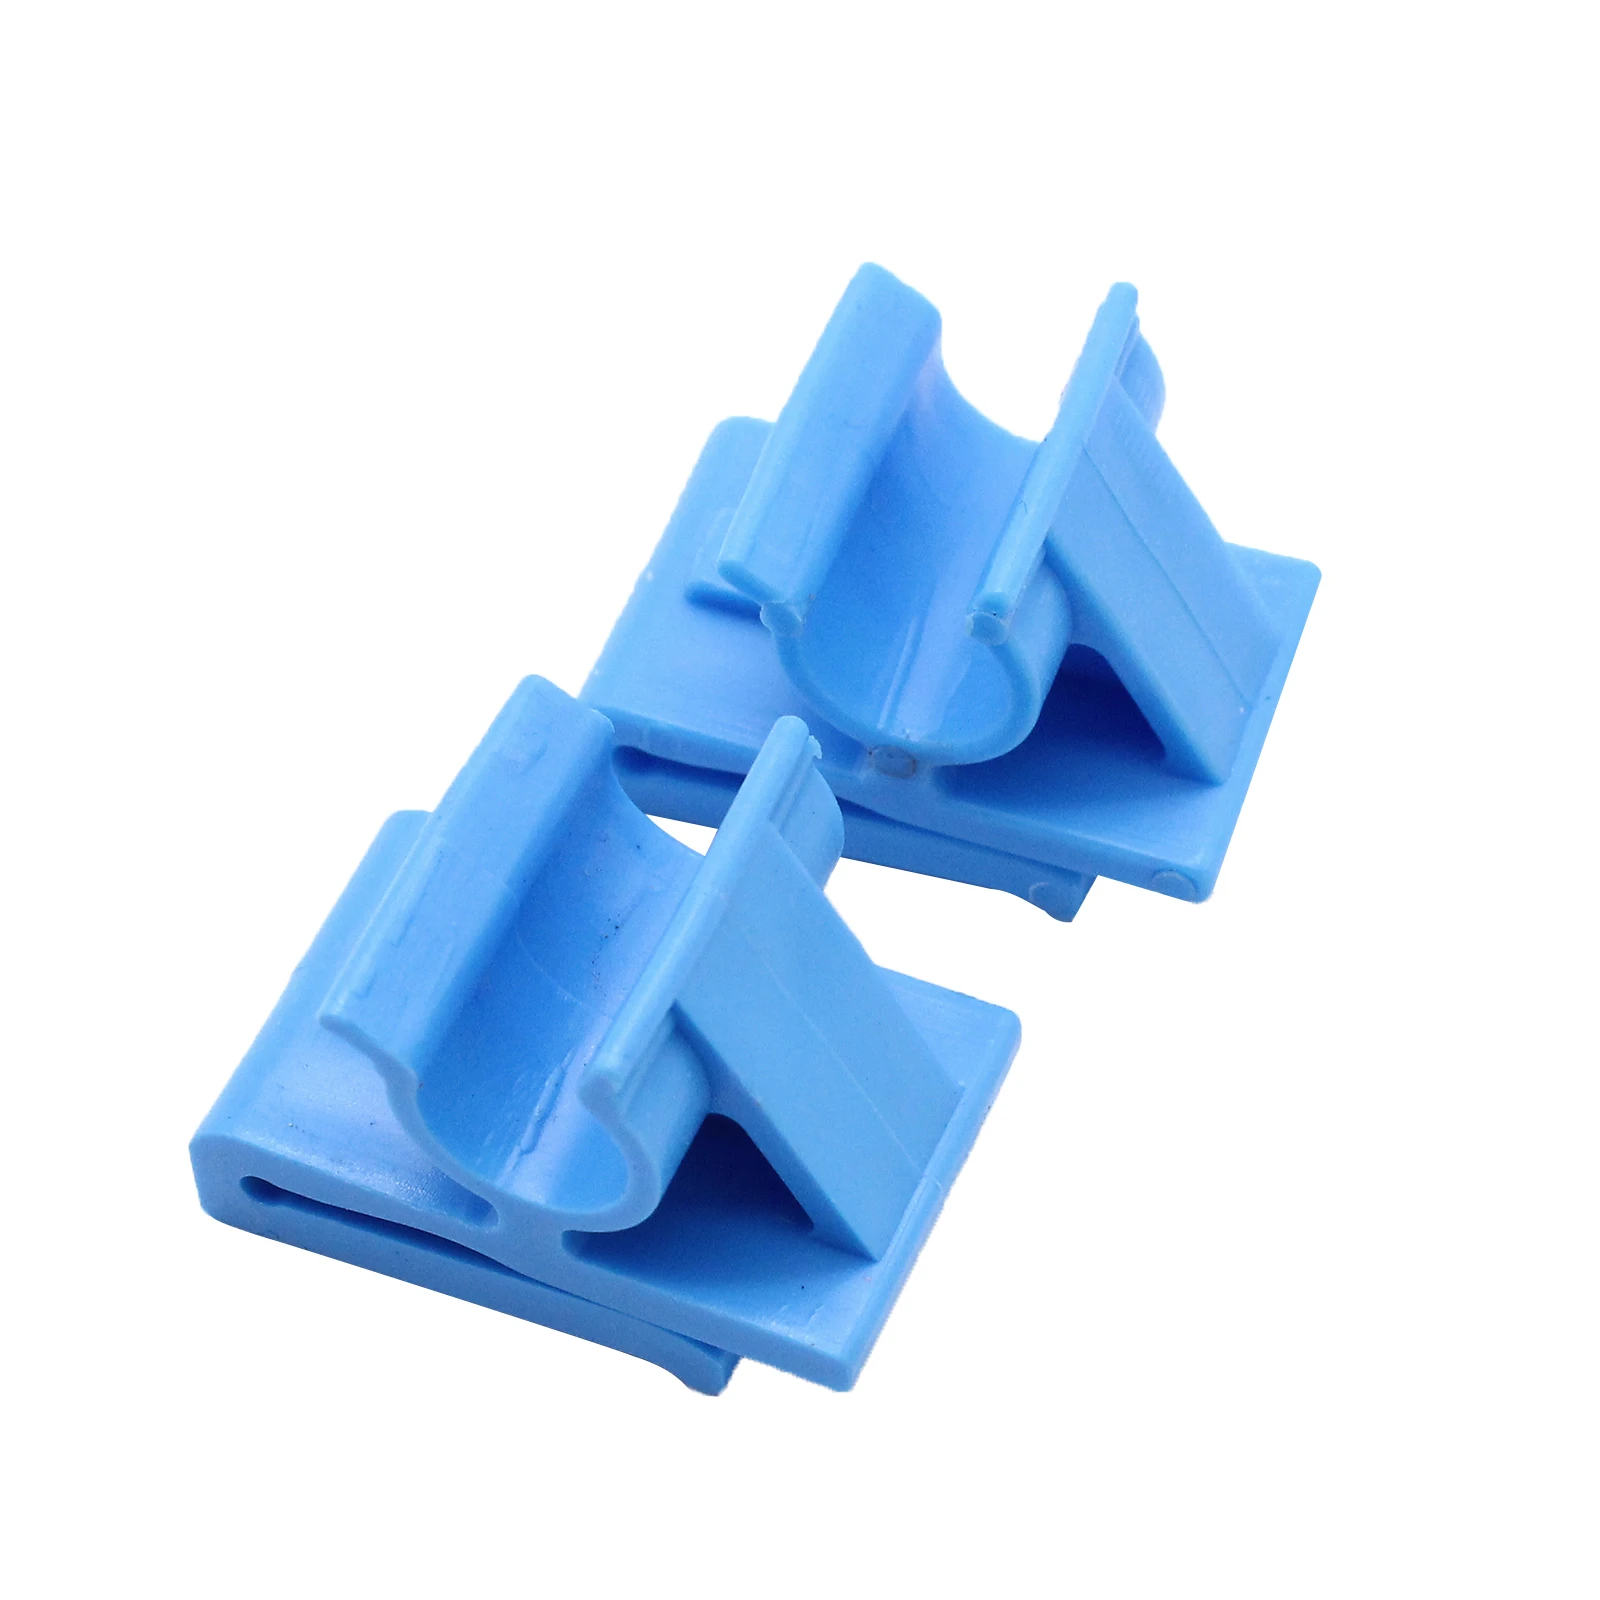 2Pcs Bump Stop Set 92189069 92201416, Blue Lower Glove Box Clips, for Holden Vehicle WK Car VY 